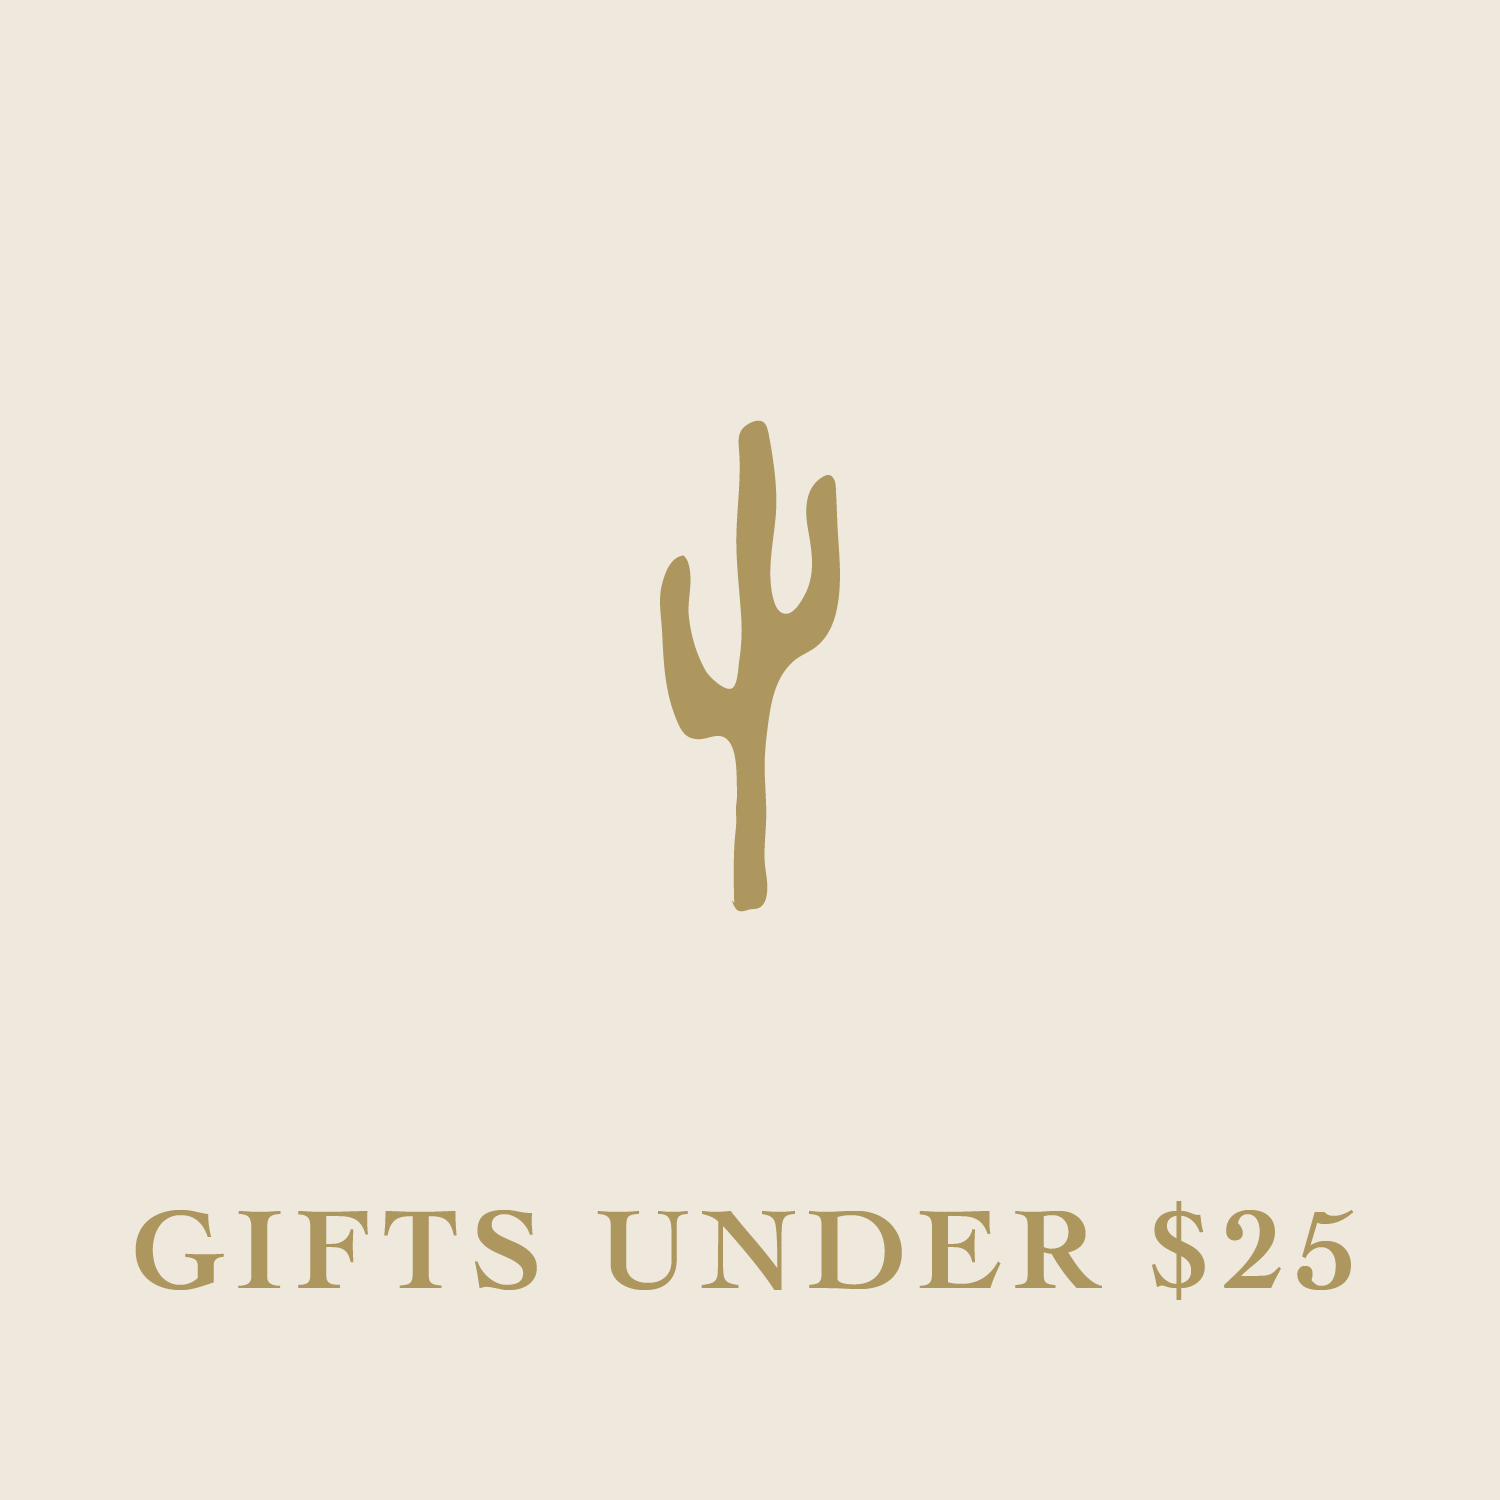 Gifts Under $25 graphic with cactus illustration 